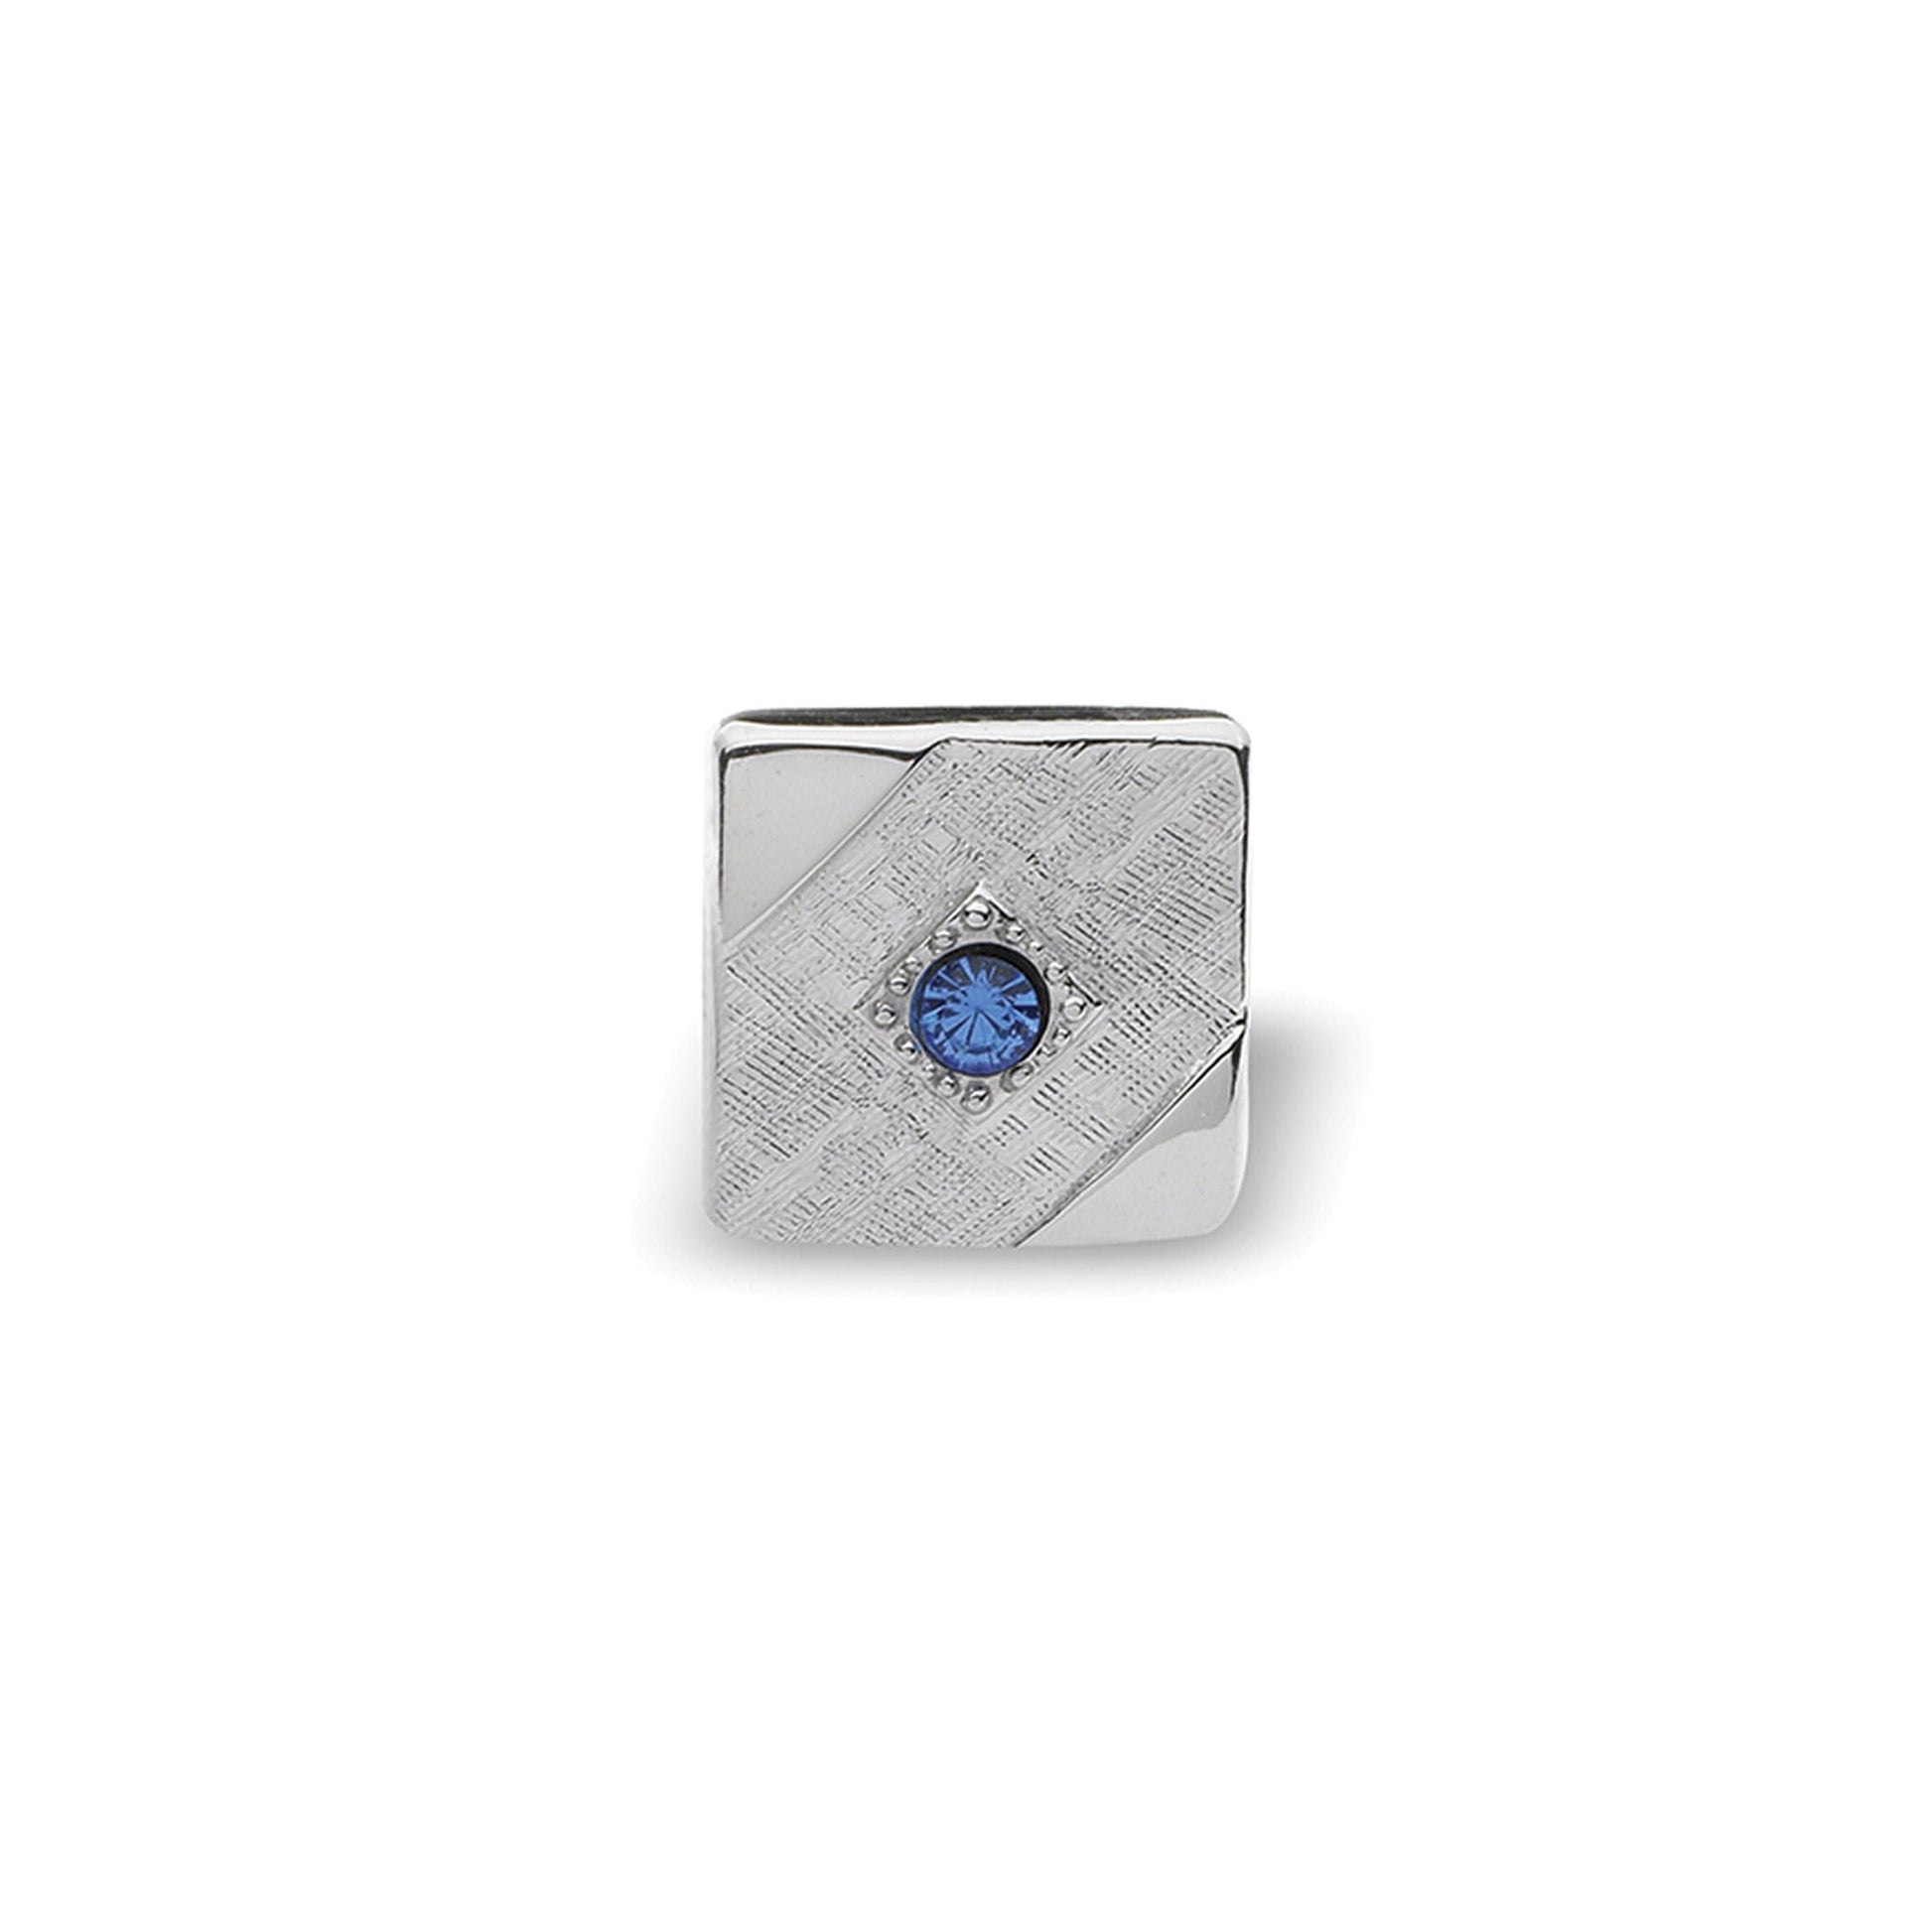 A square florentine tie tack with blue stone displayed on a neutral white background.